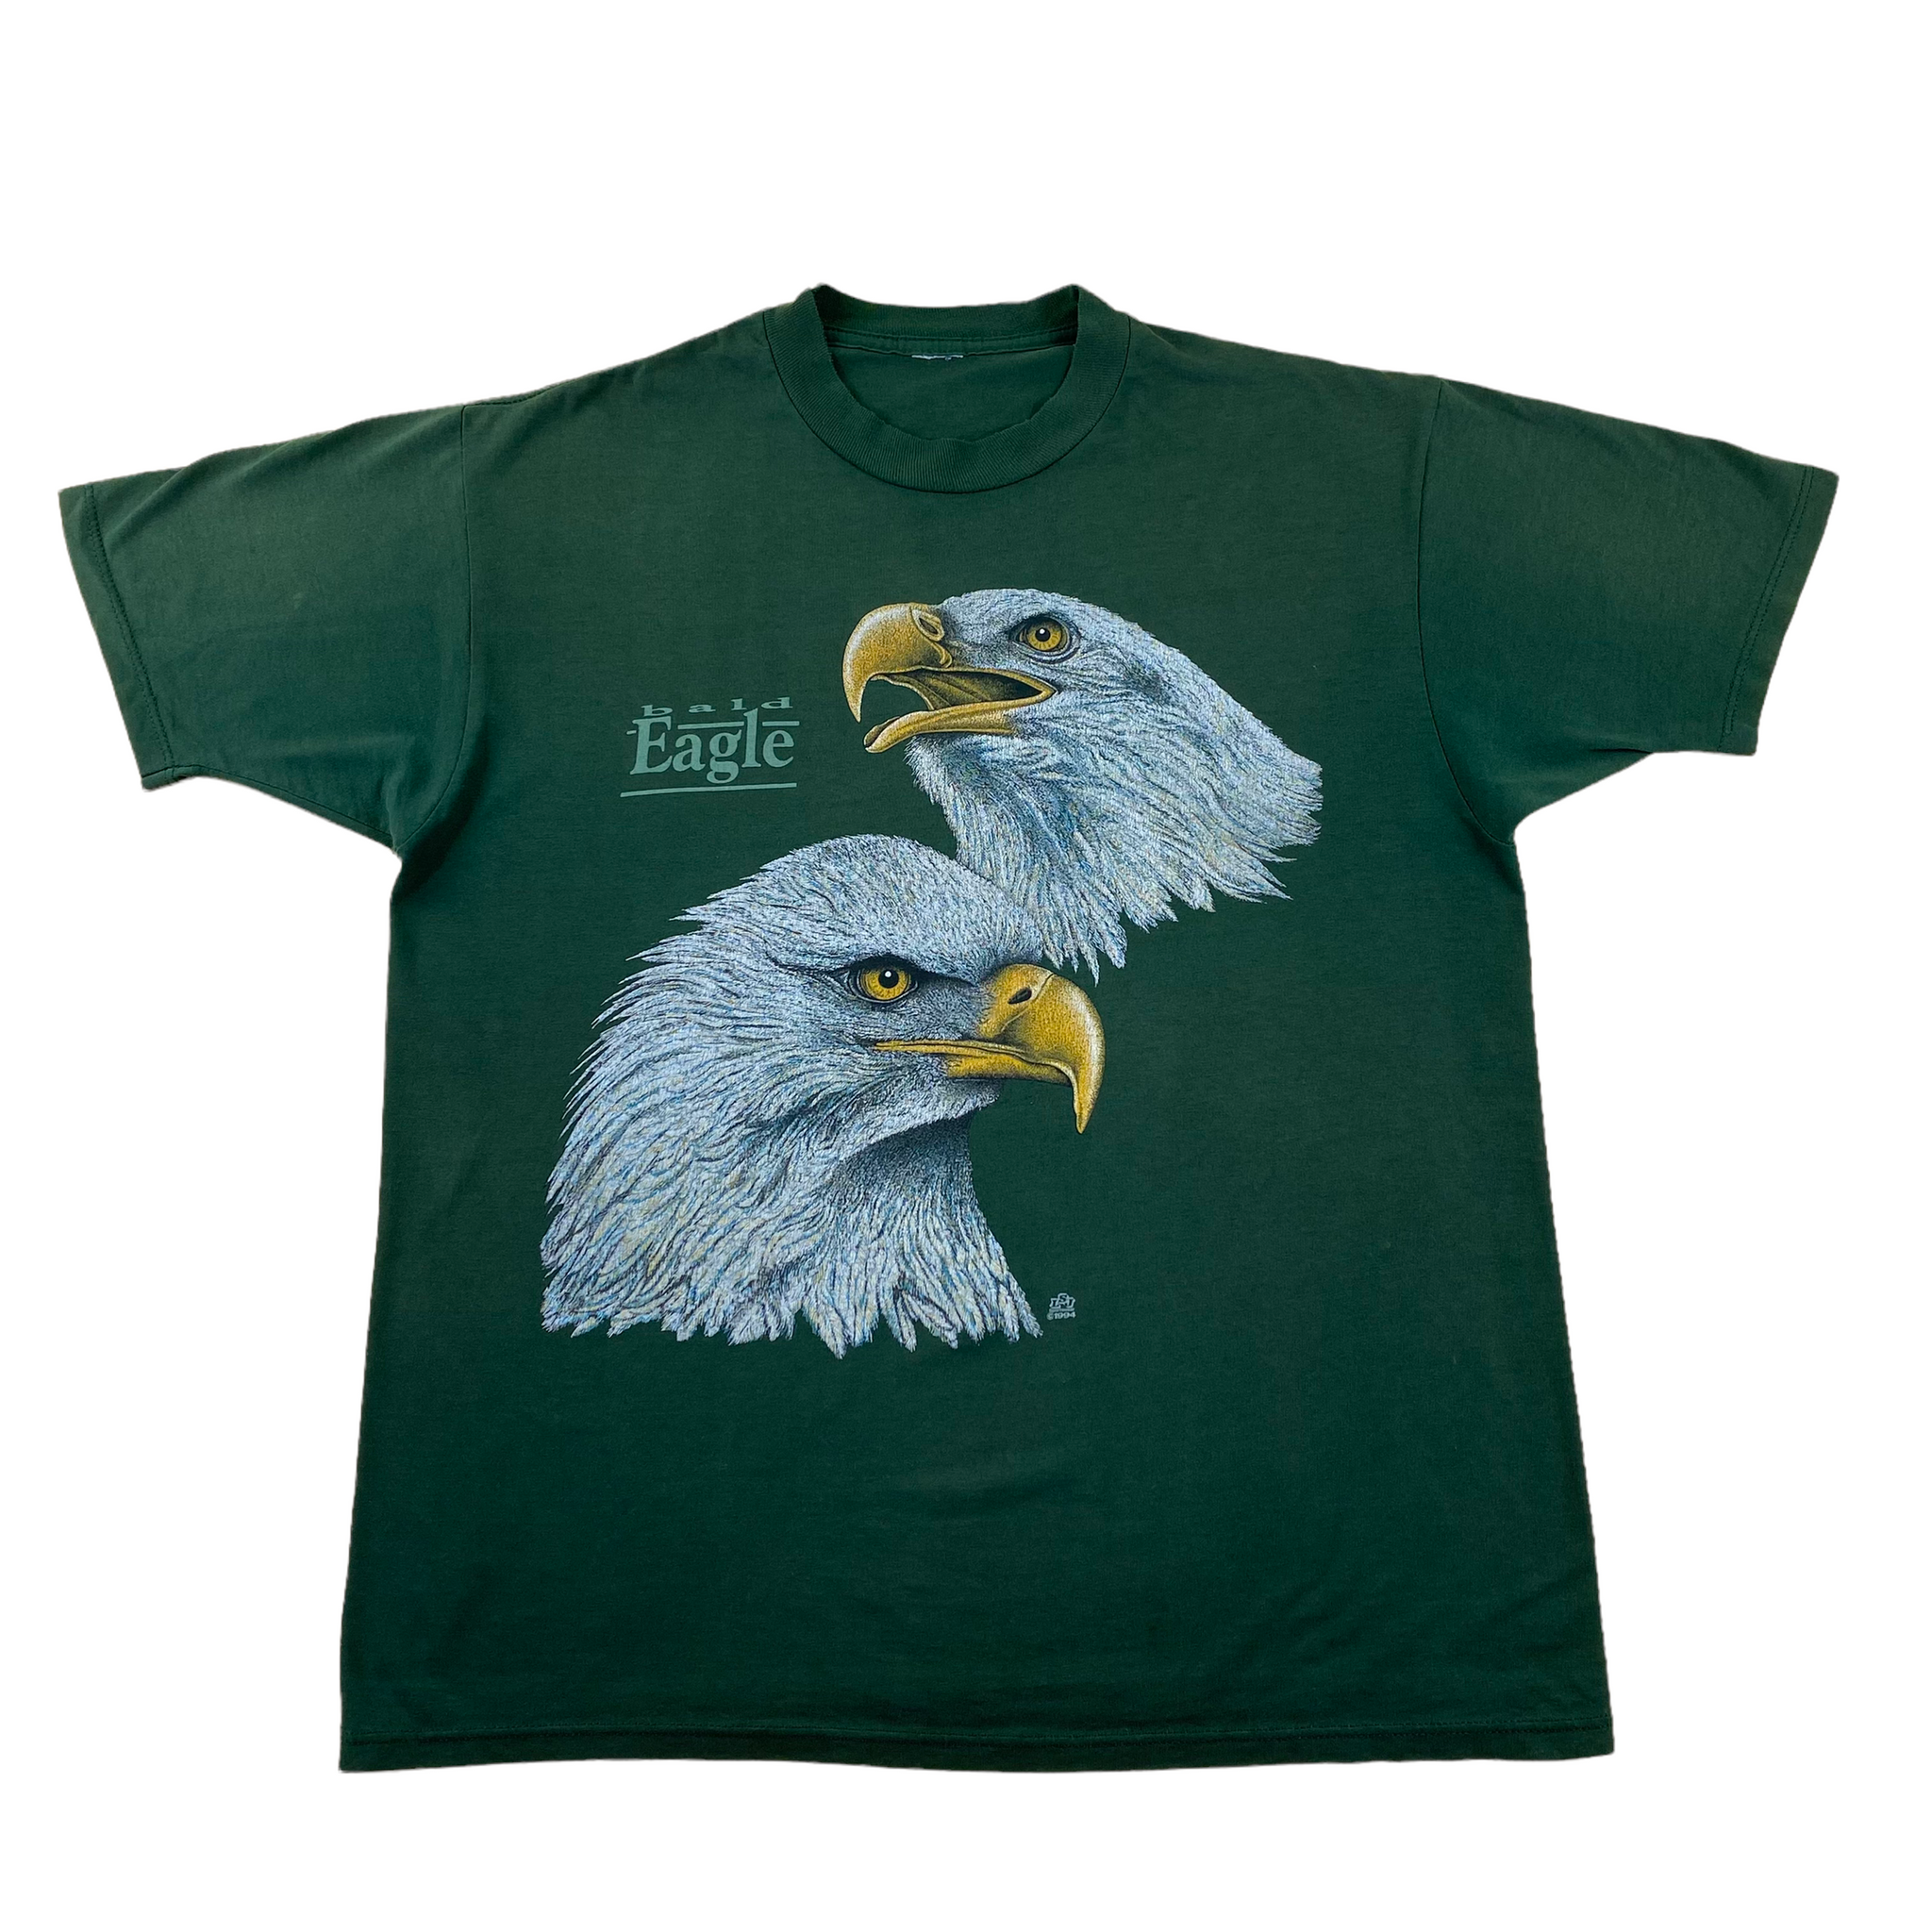 90s Lion or eagle tee large